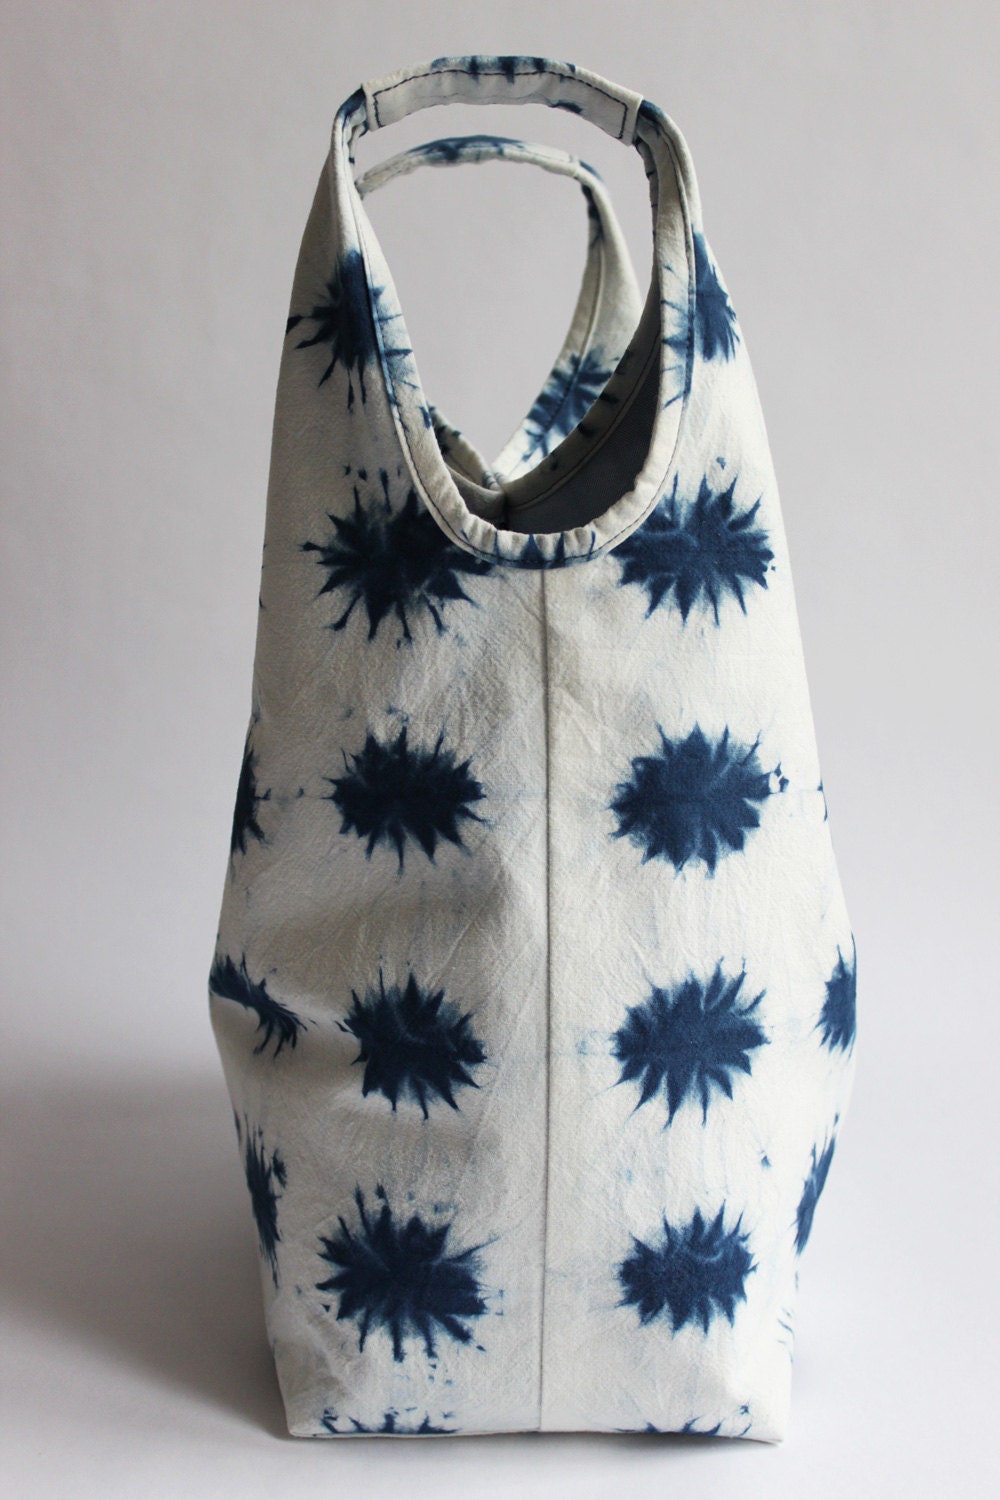 Little Suns Shibori Hand Dyed Cotton Tote Bag Japanese by Rejell